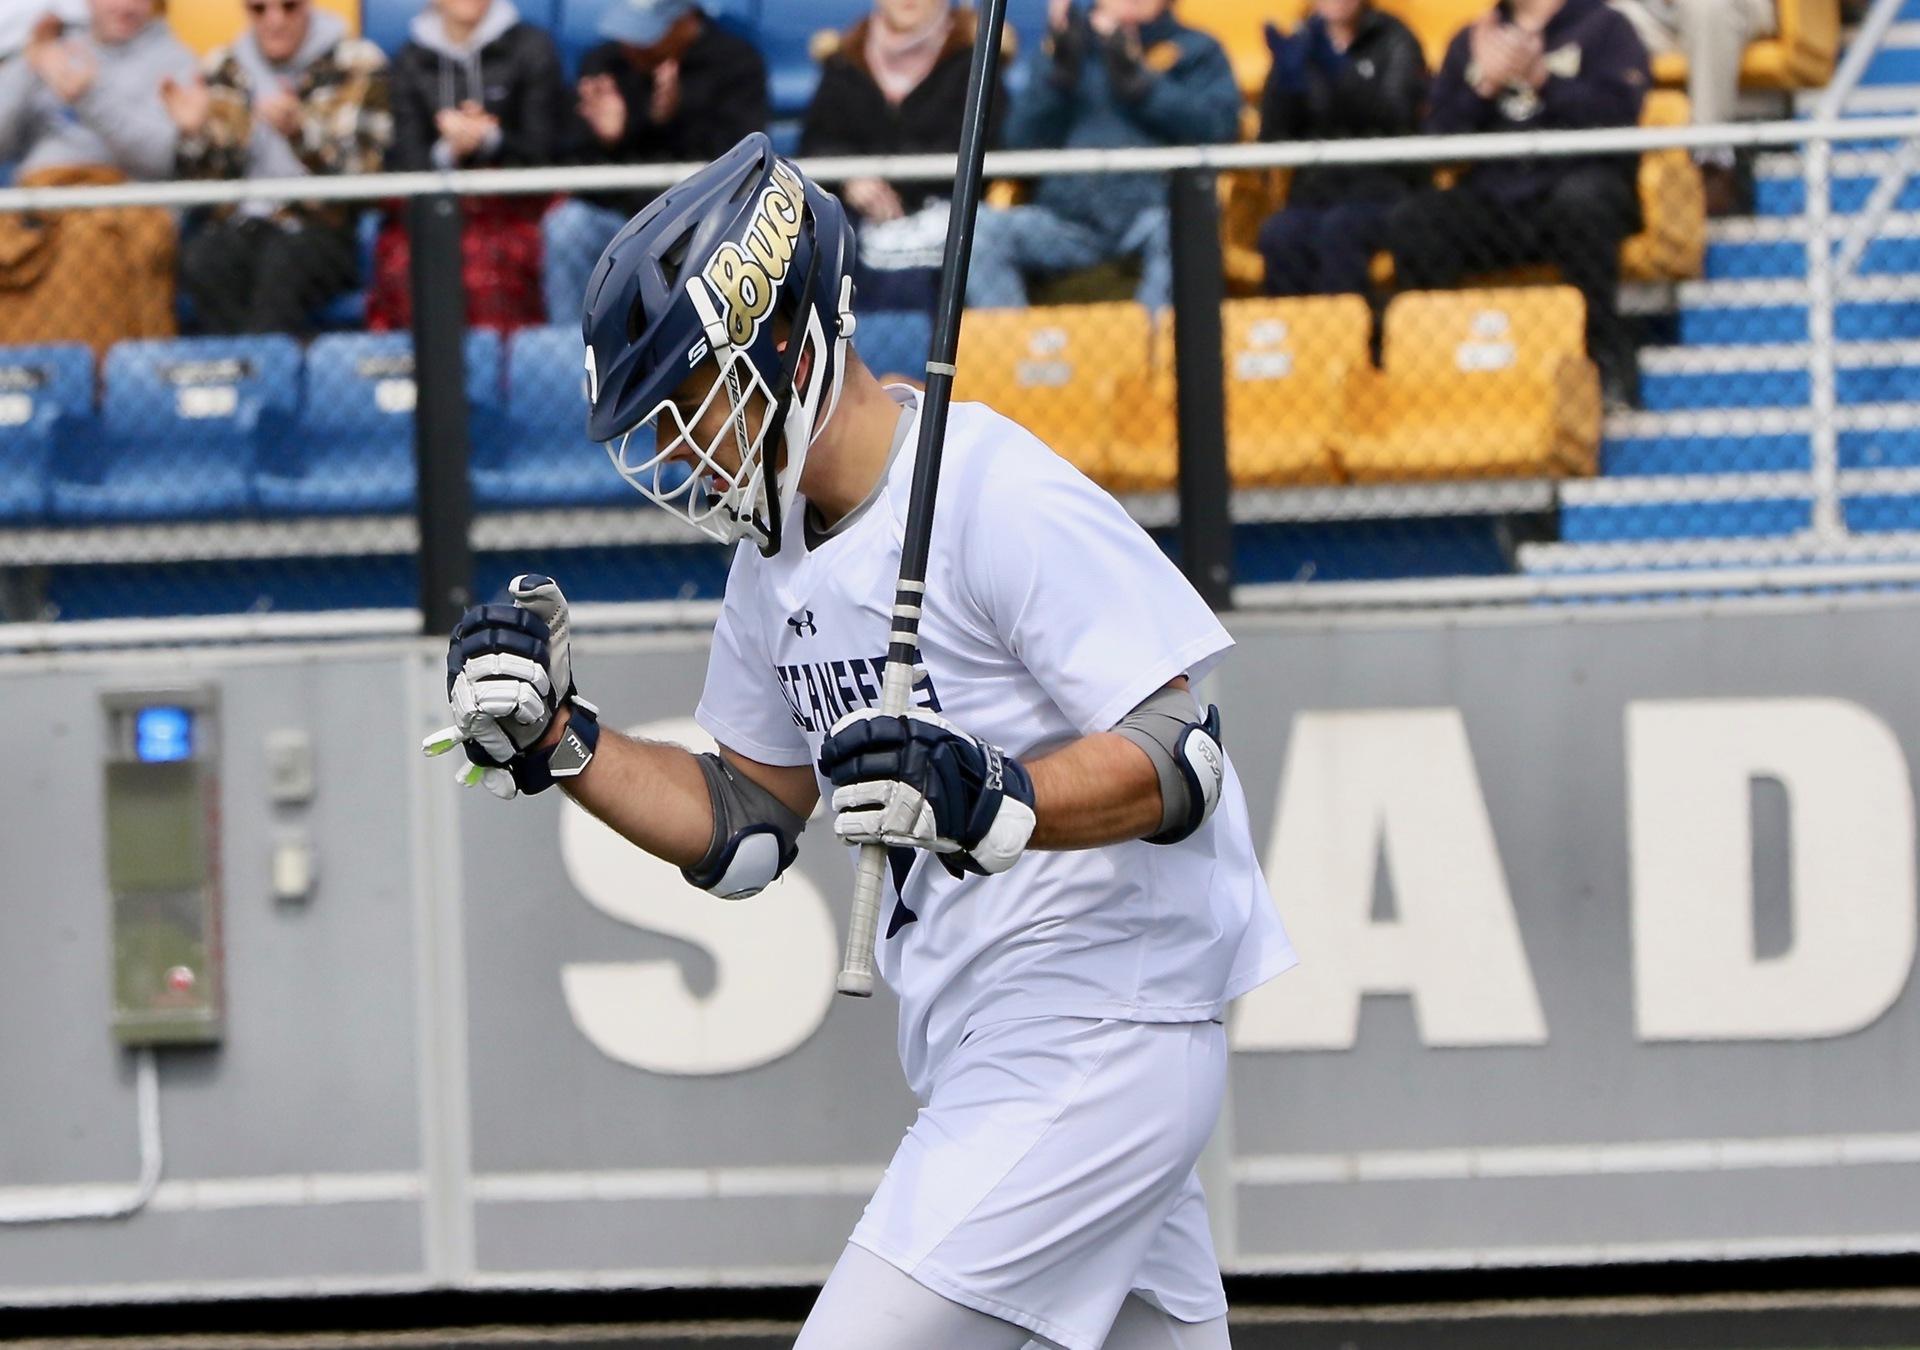 Men's Lacrosse Wins First LEC Game Convincingly over Southern Maine